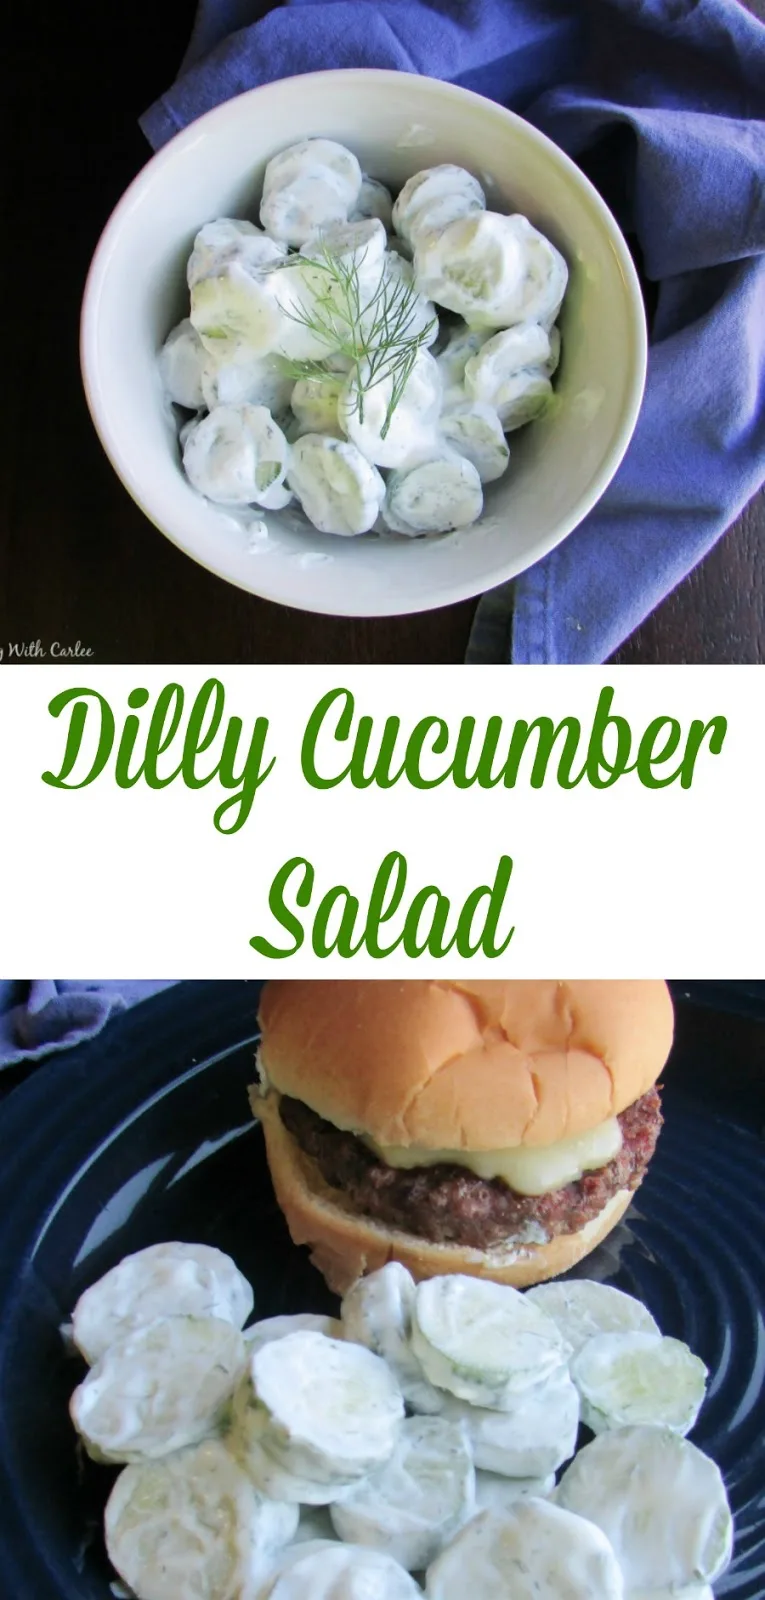 Fresh cucumbers are dressed in up in simple creamy dill sauce for a favorite refreshing summer side dish!